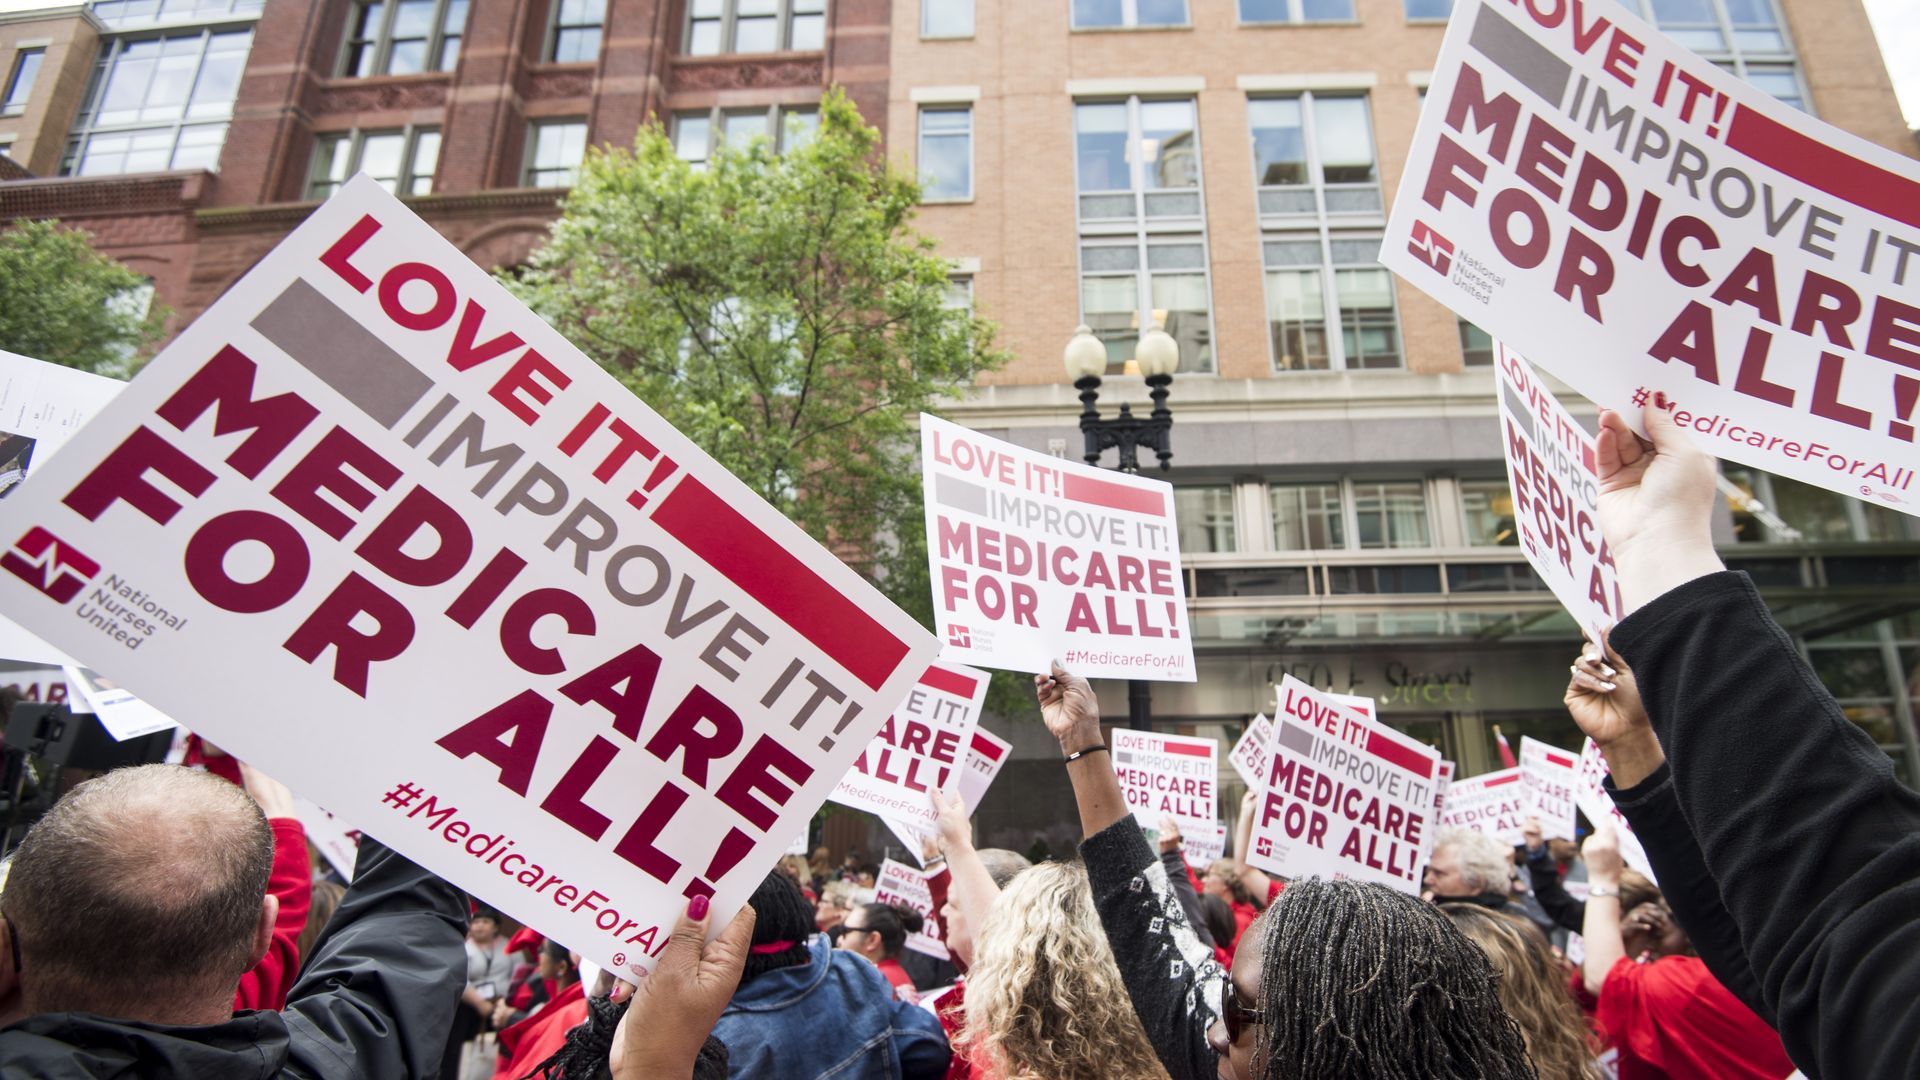 A Medicare for All rally in Washington